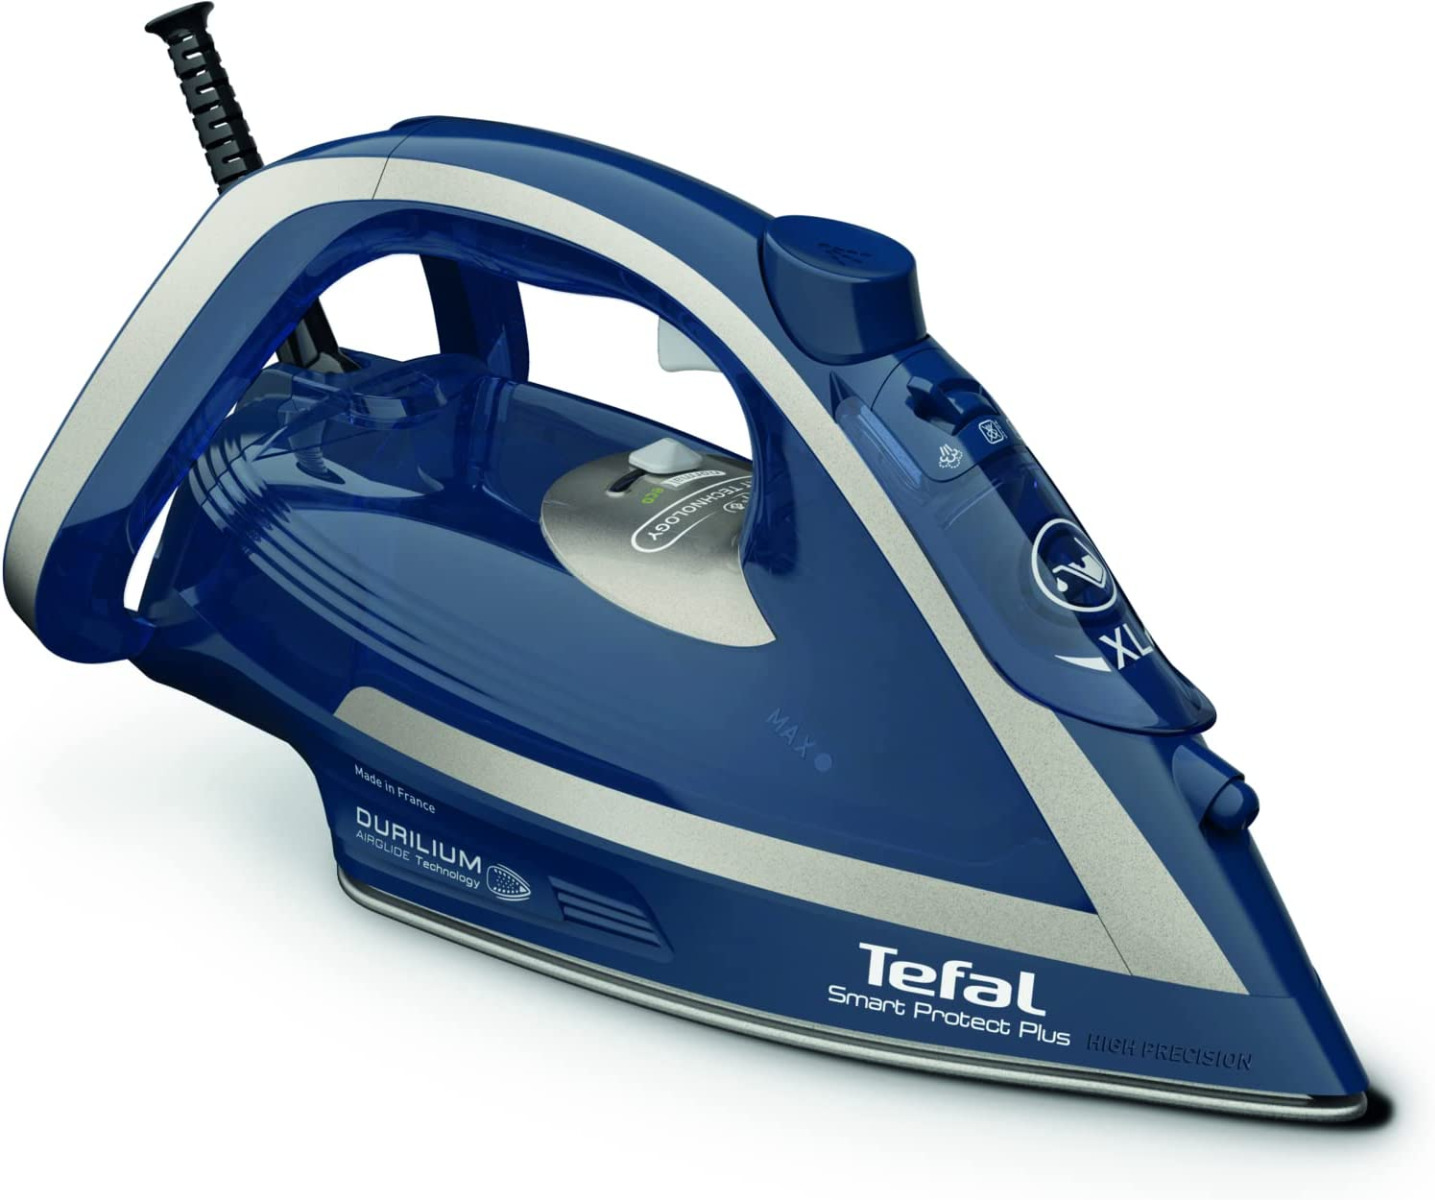 Tefal Steam Iron - Continuous Steam Flow of 40 Grams per minute and 260 g/min with the boost for thick fabrics - 2800W - 270ml - 50/60Hz - Smart Protect - FV6872M0